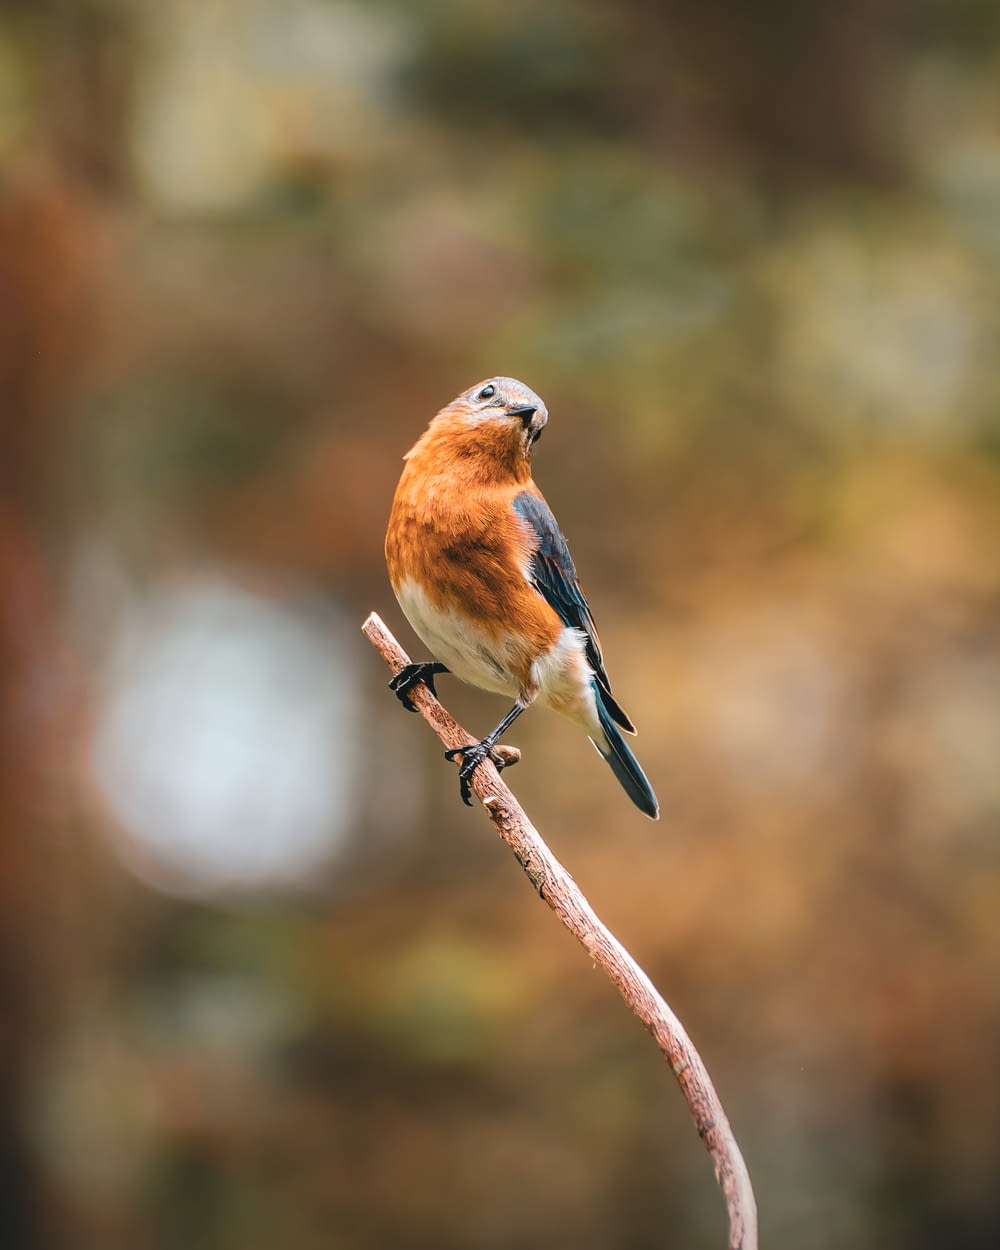 a bird sitting on a branch with a blurry background